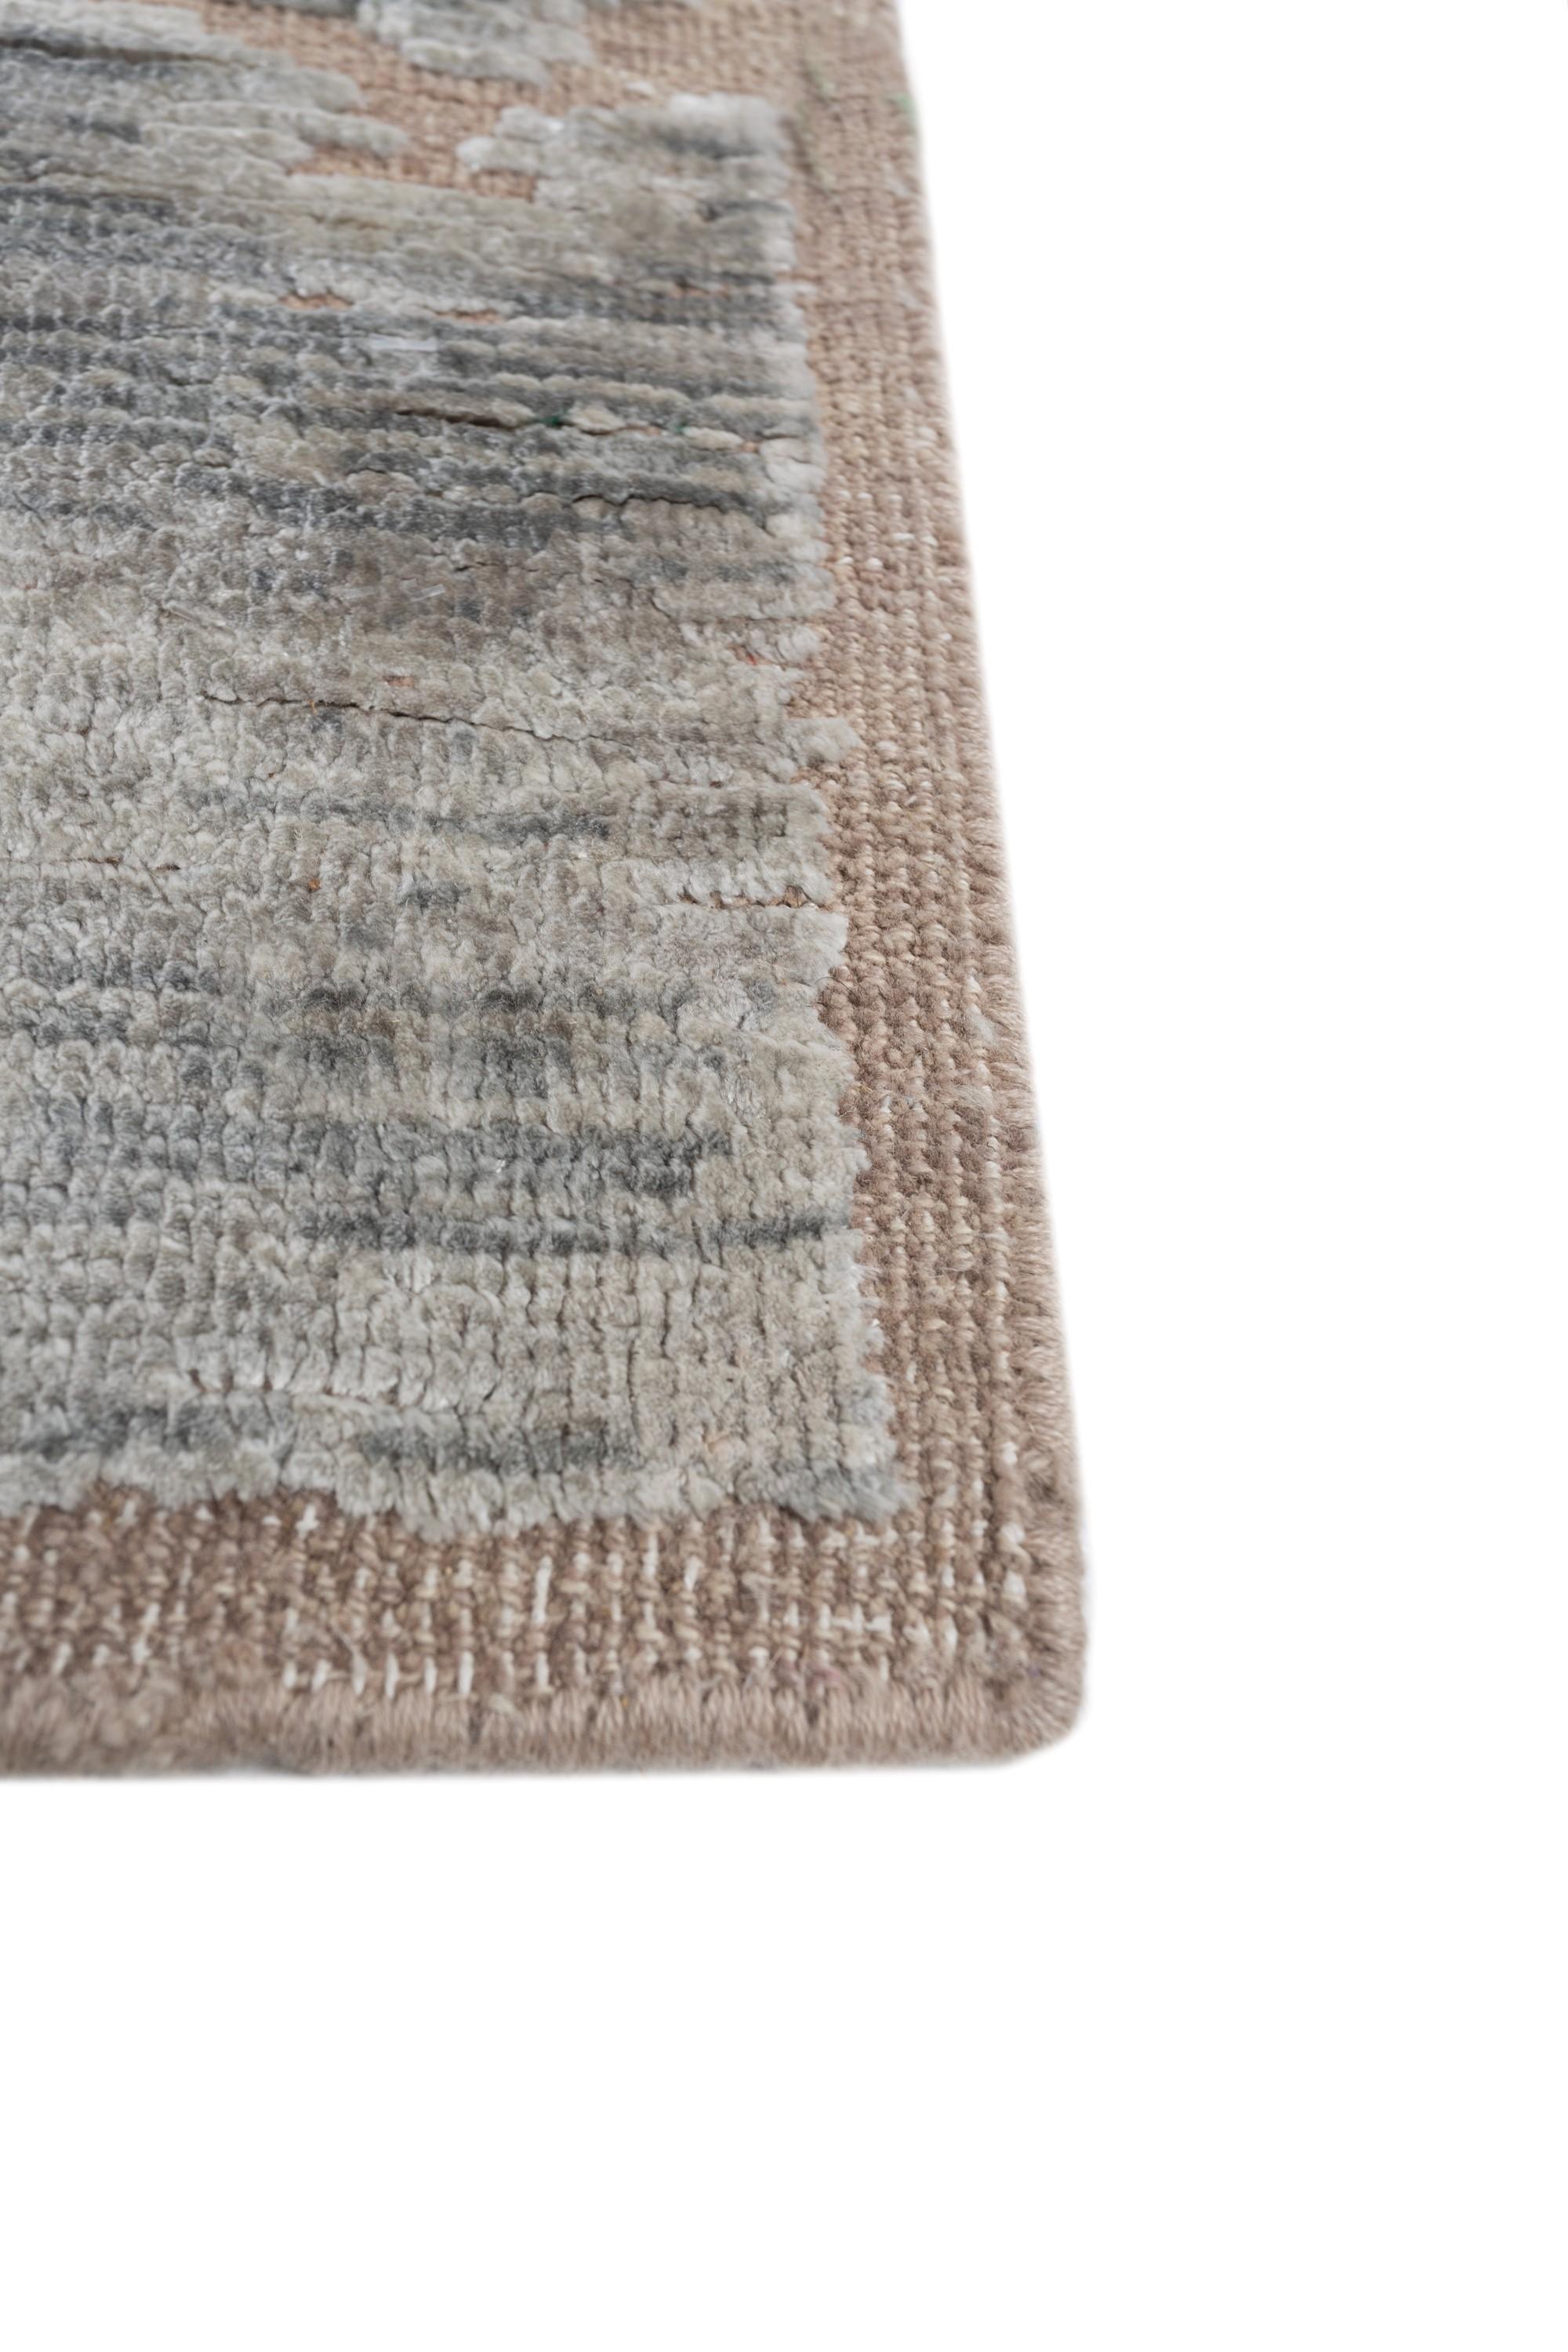 Ready to transform your space? Explore the enchanting allure of this hand-knotted modern rug. With its tone-on-tone palette, this masterpiece instantly uplifts the mood of any room, adding warmth and comfort to your floors. Meticulously handcrafted,